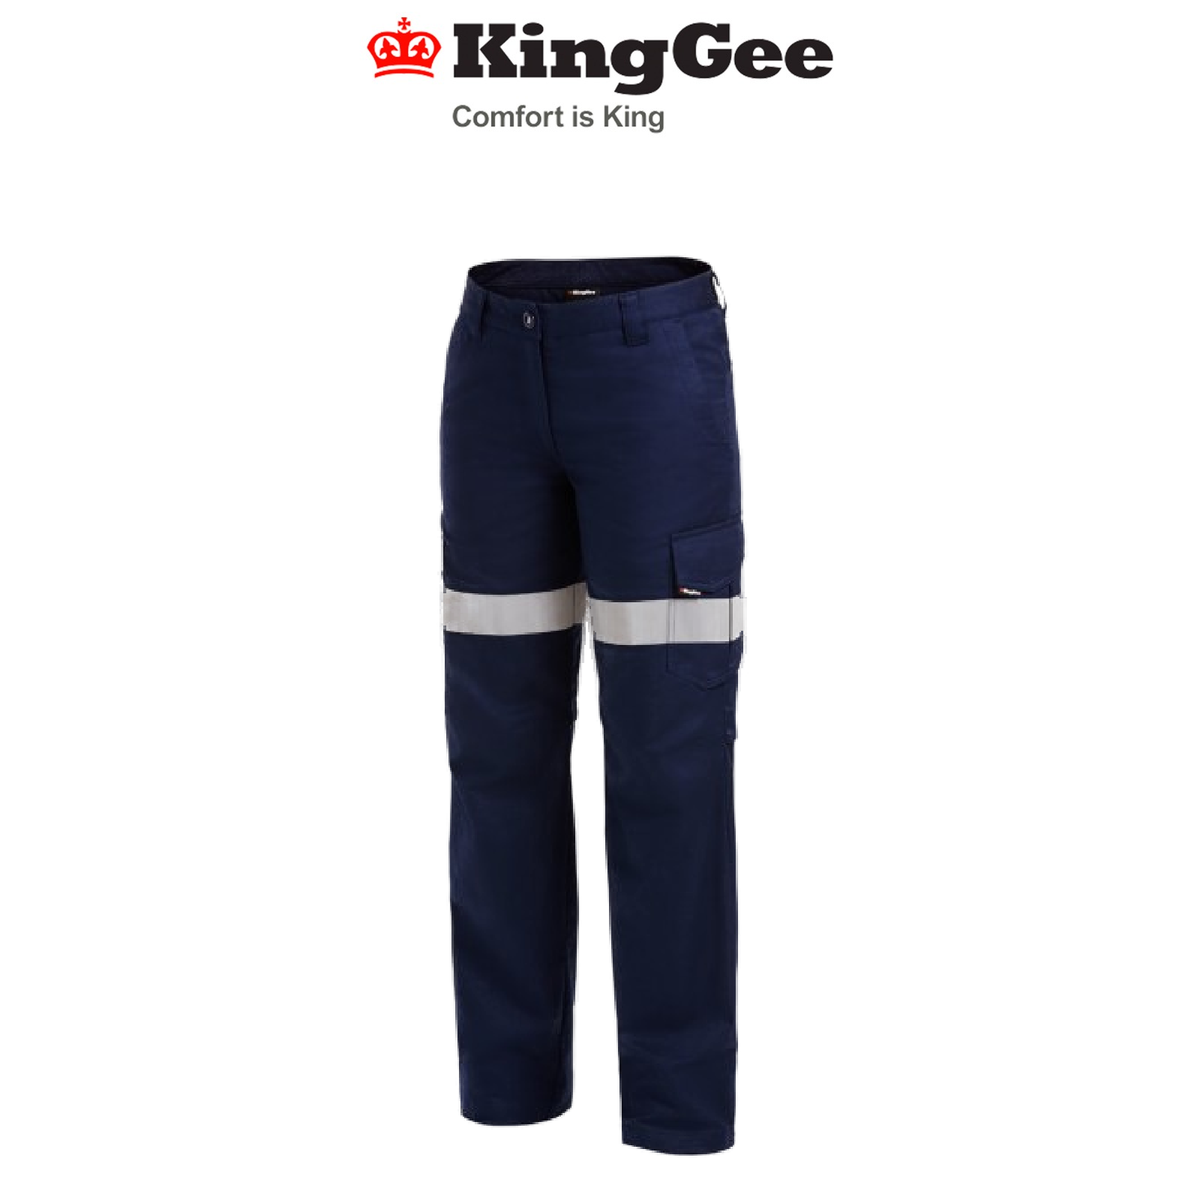 KingGee Womens Workcool 2 Reflective Pants Breathable Ripstop Work Safety K43825